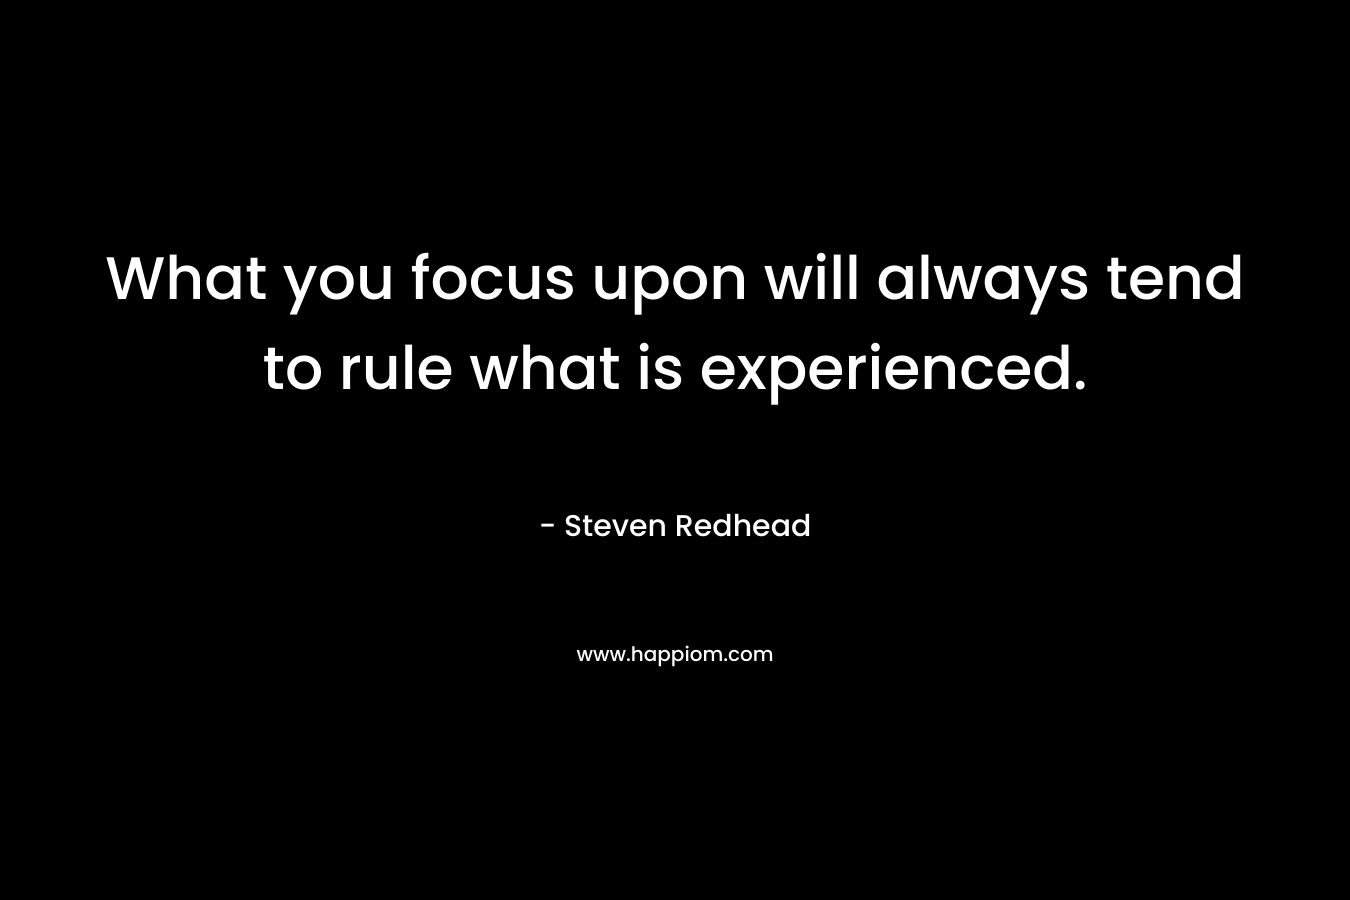 What you focus upon will always tend to rule what is experienced.